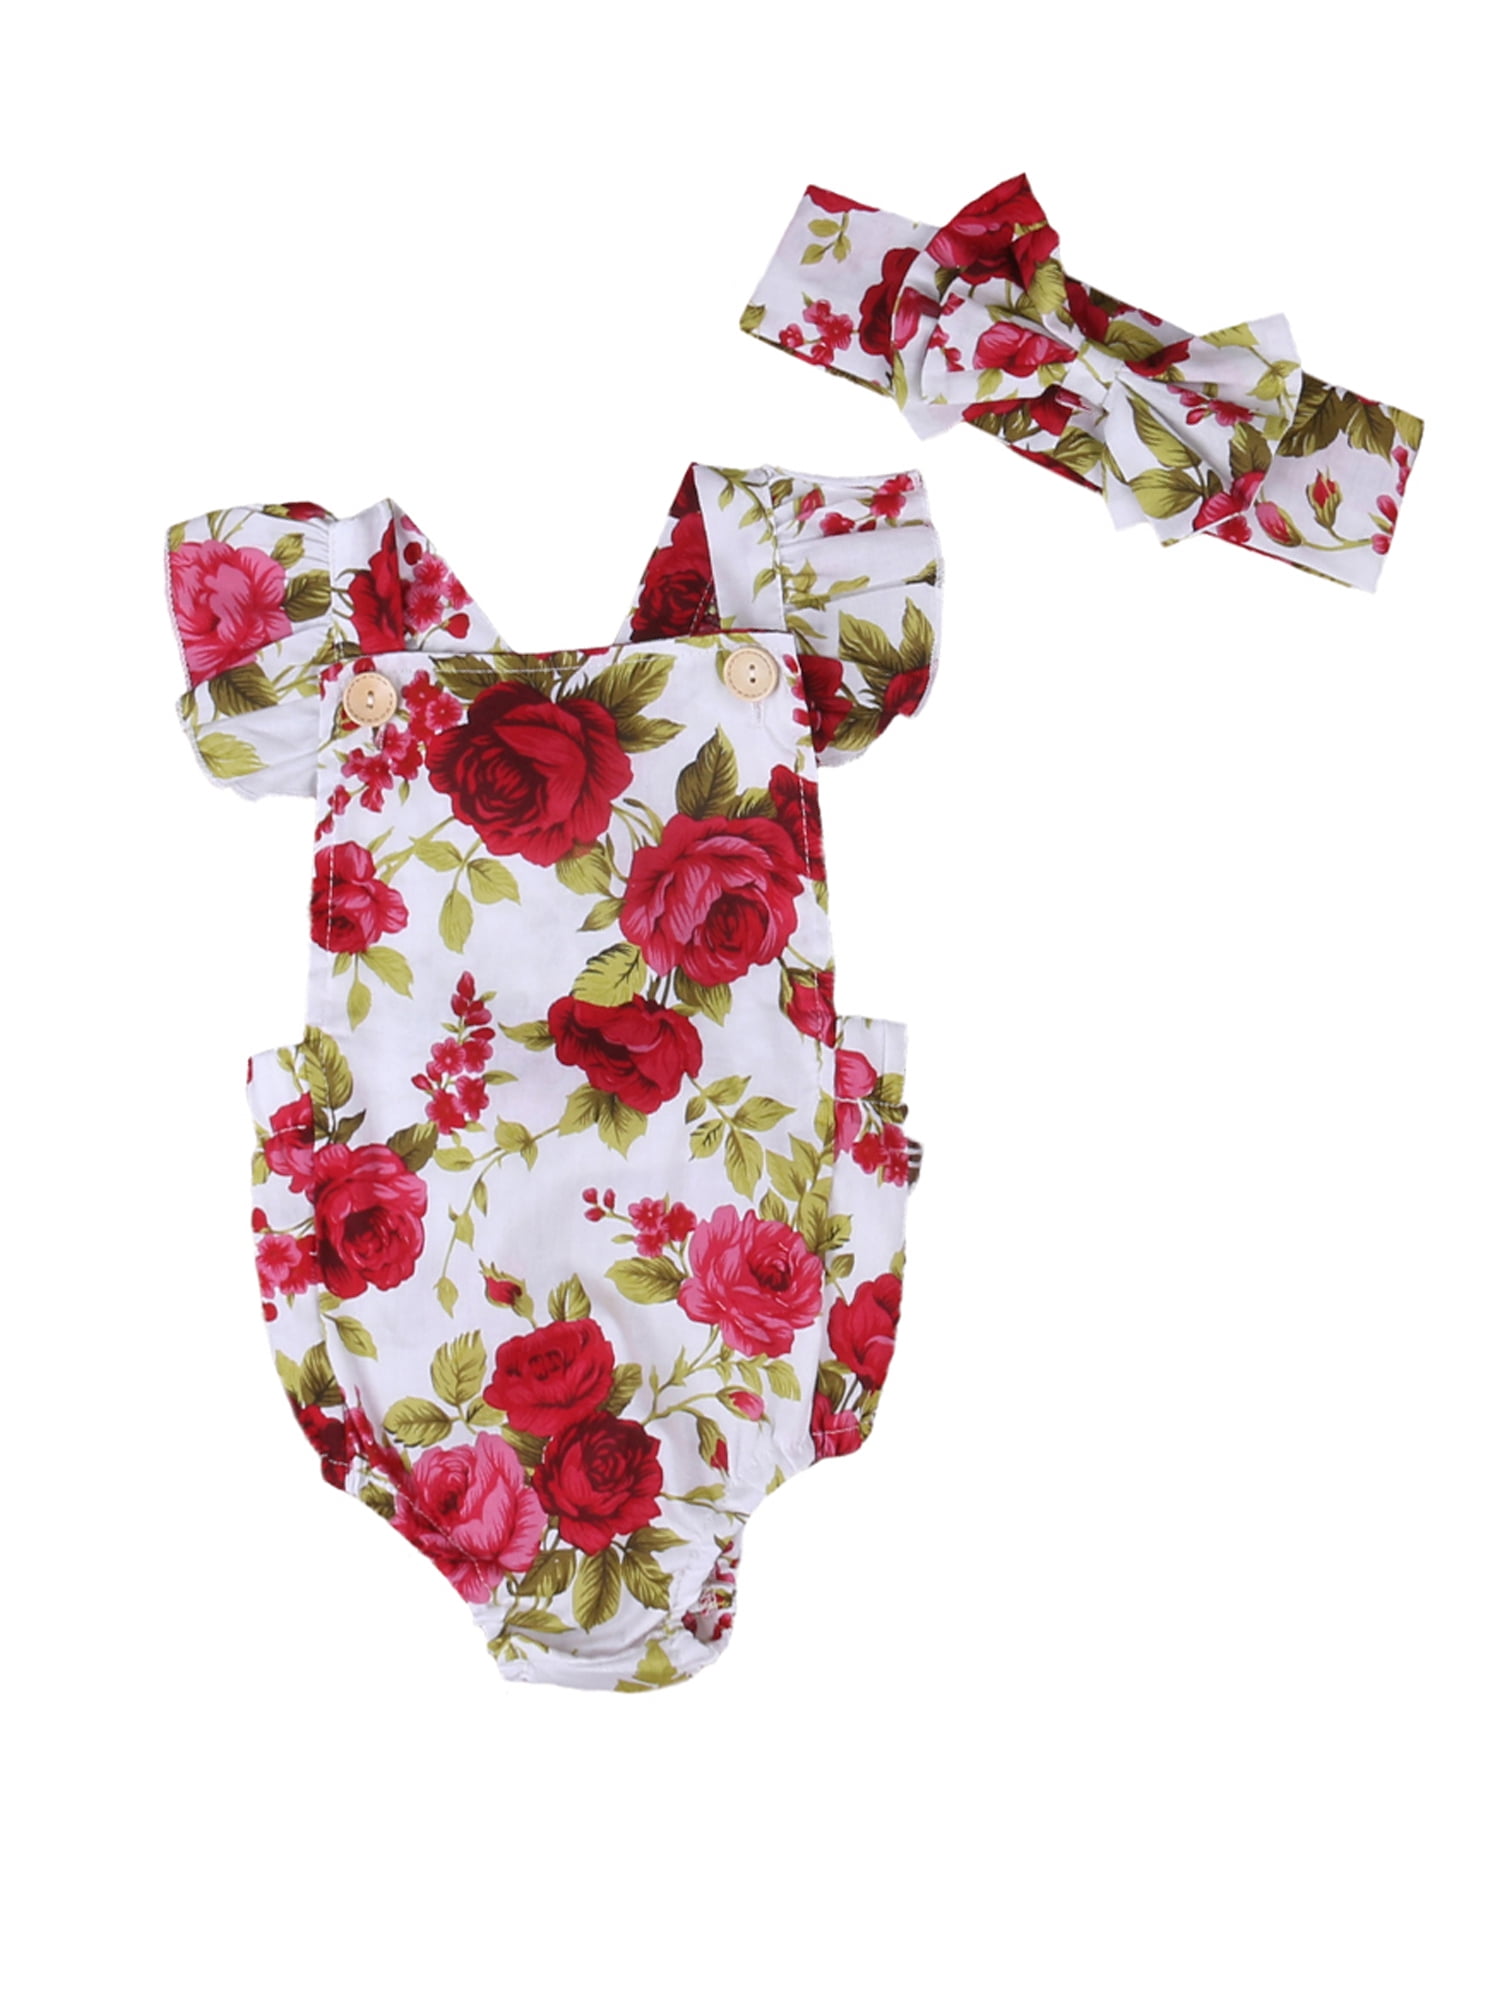 Canis Newborn Infant Toddler Baby Girls Clothes Flower Jumpsuit Romper ...